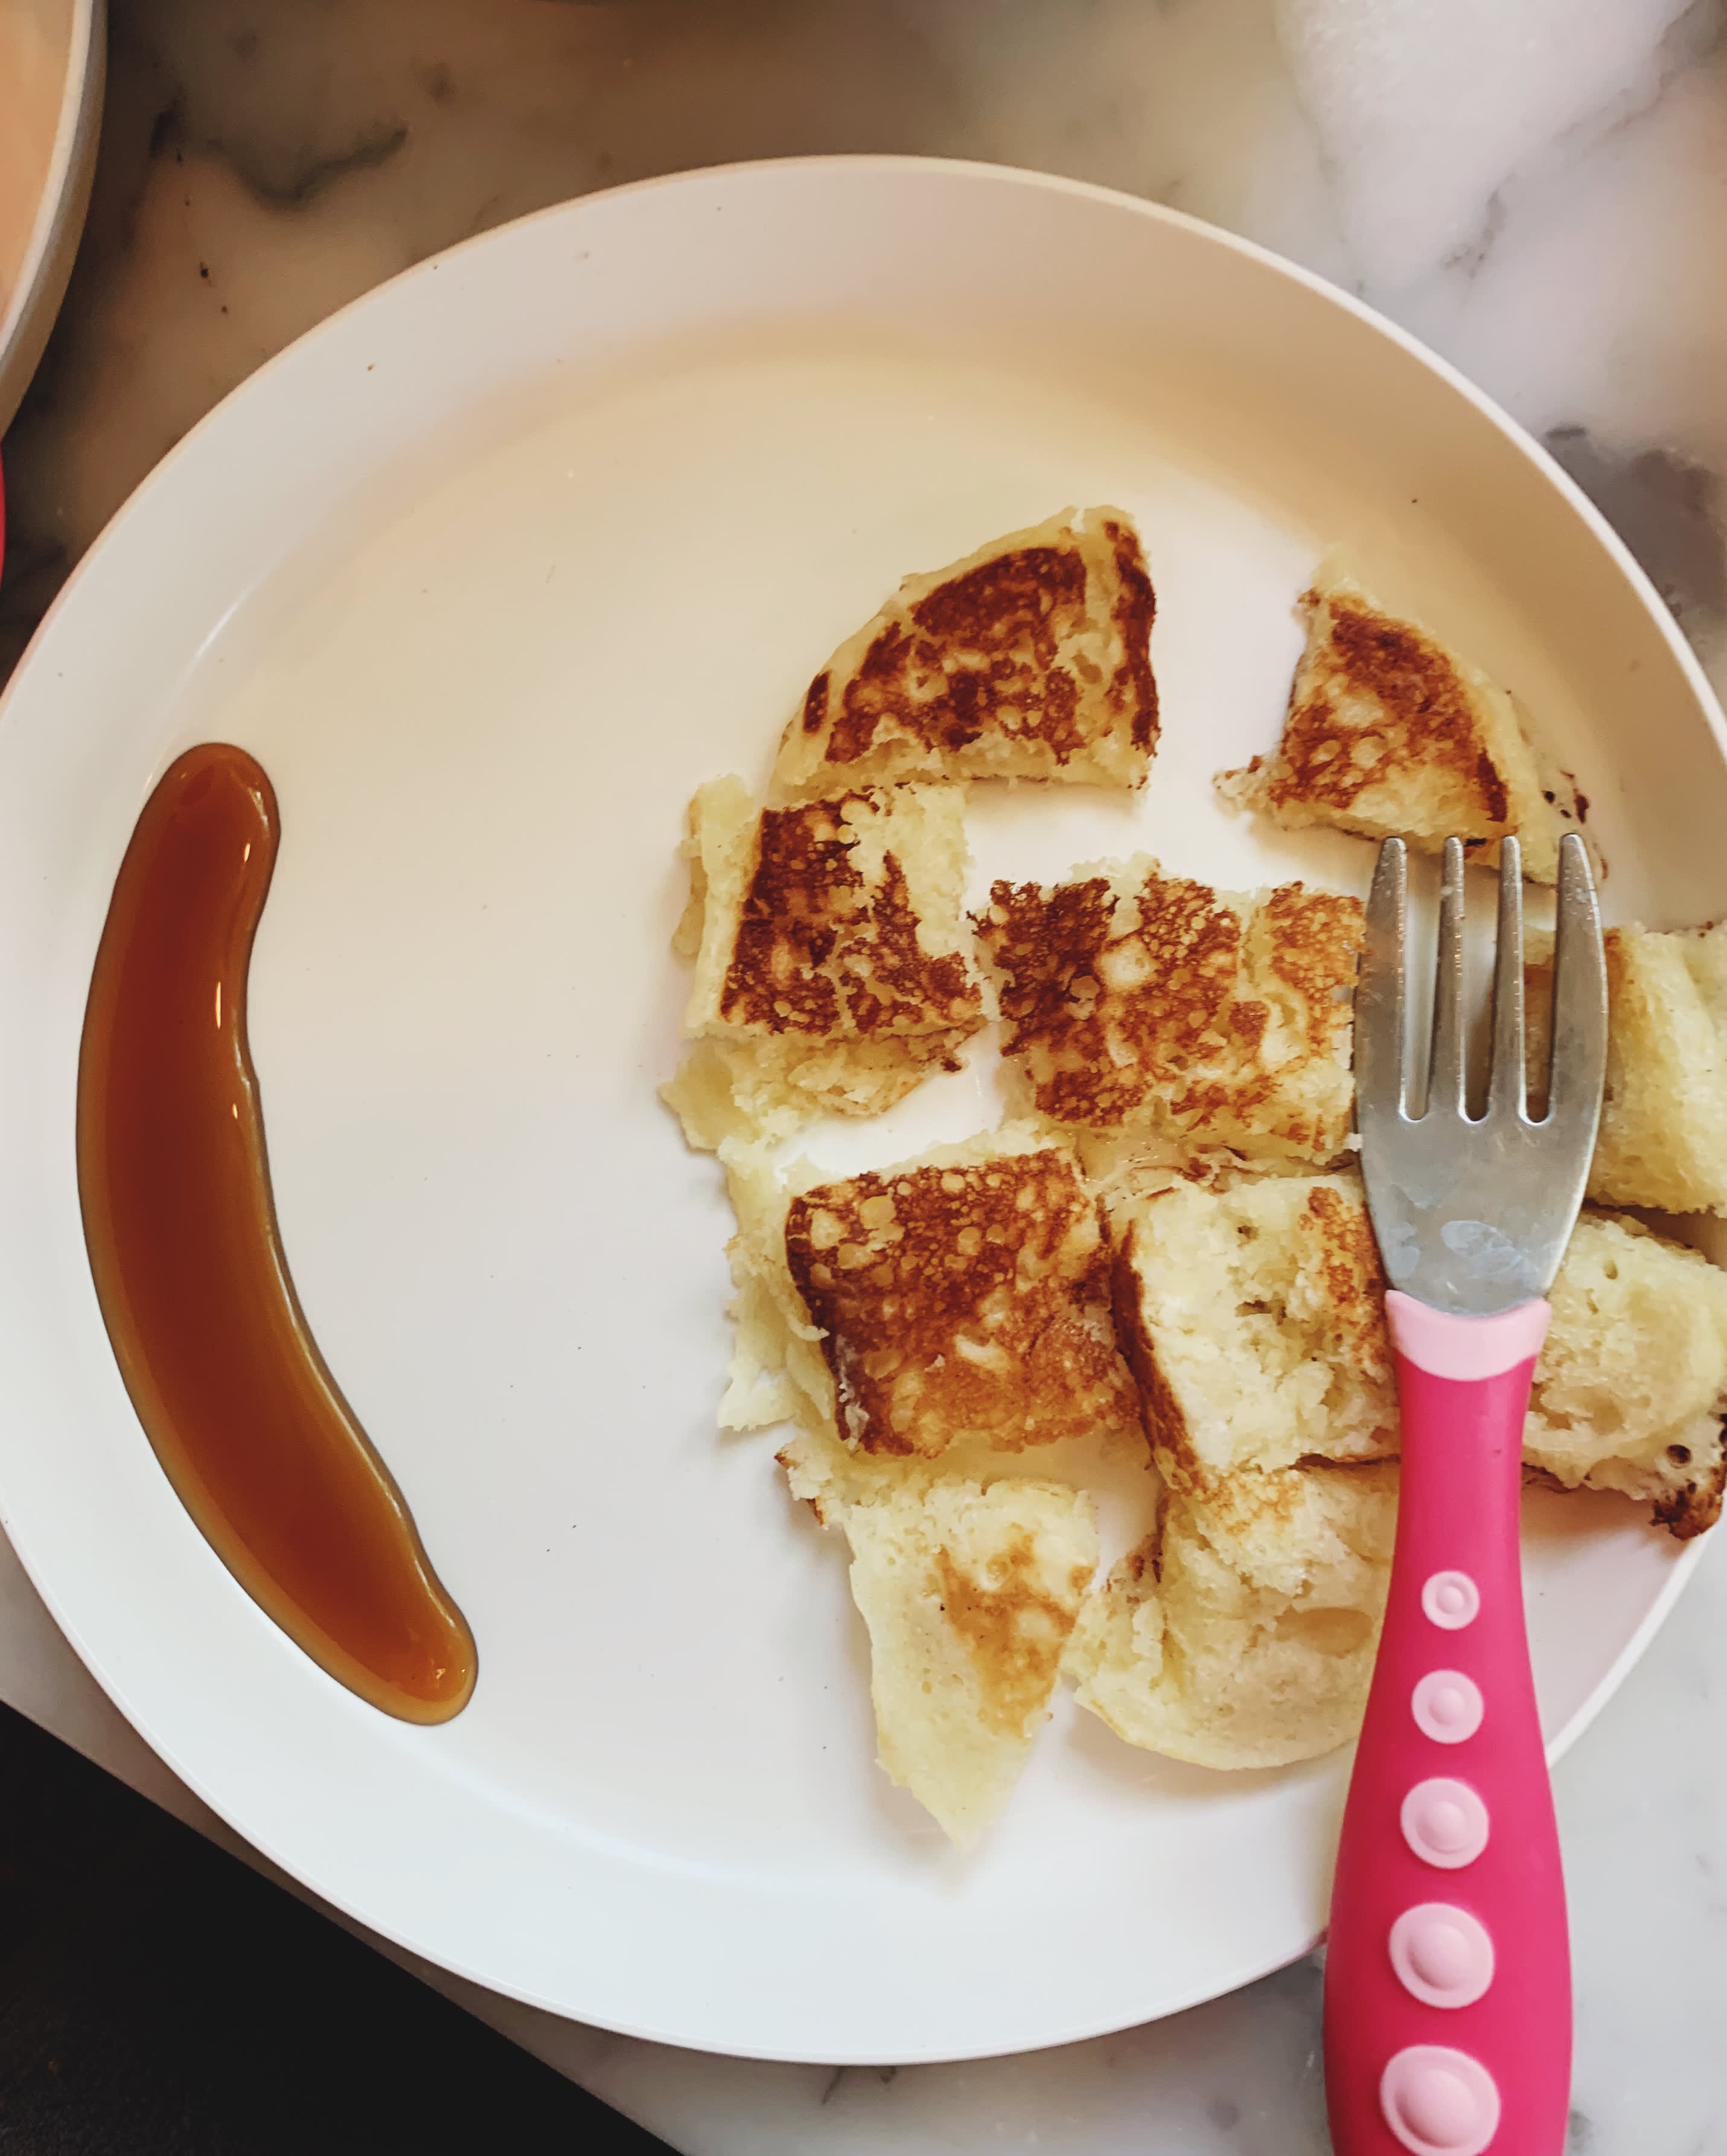 The Very Best Pancake Recipe I've Made for Years